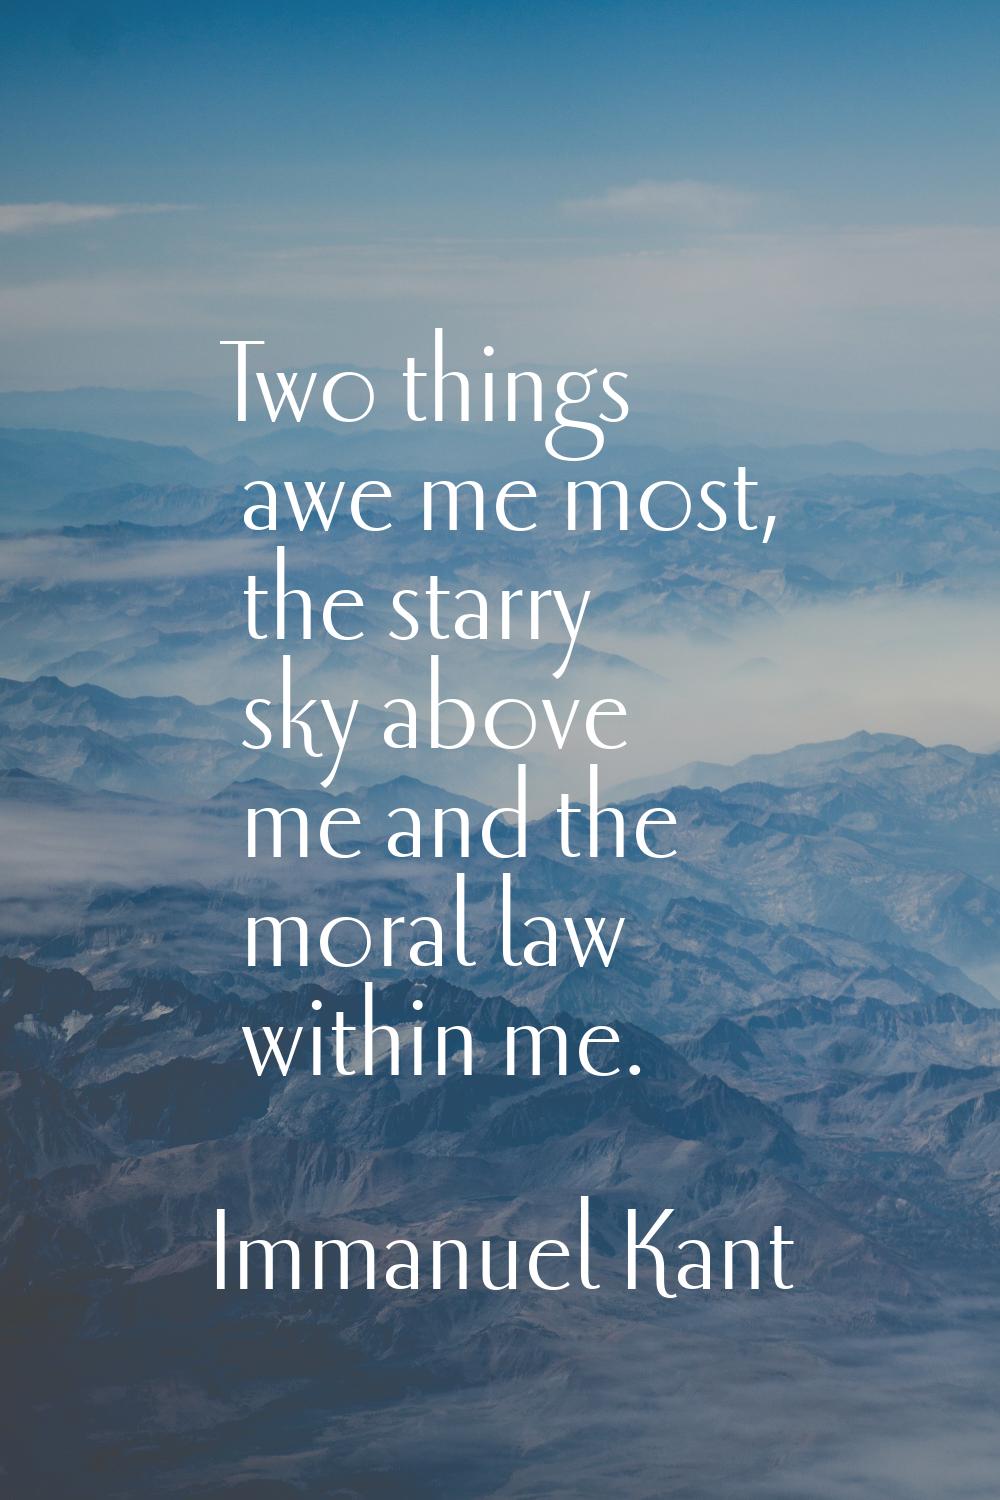 Two things awe me most, the starry sky above me and the moral law within me.